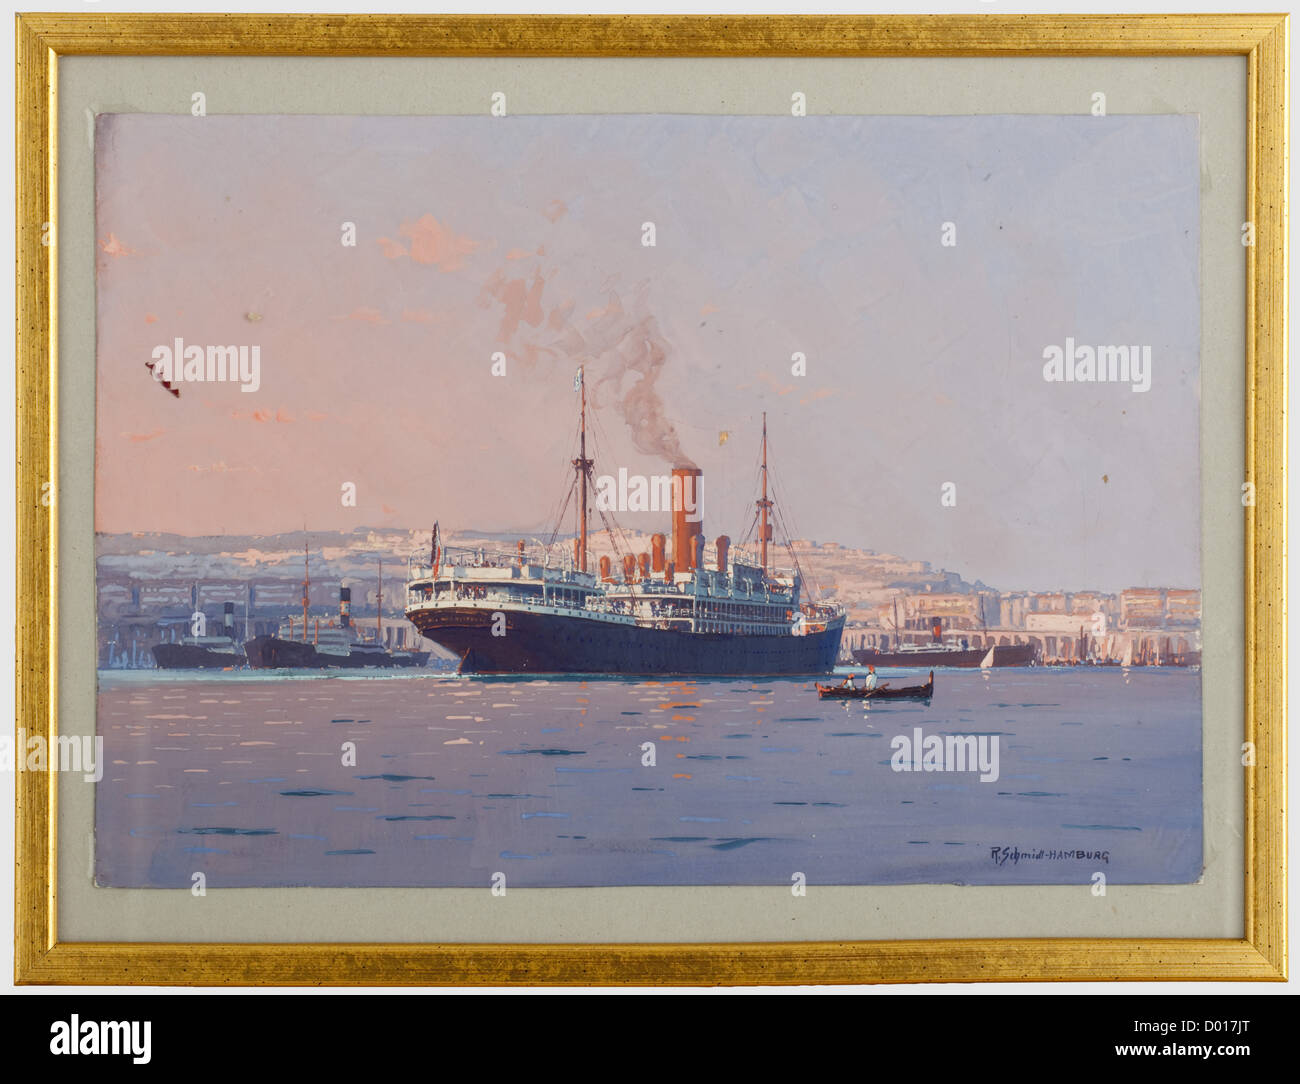 Robert Schmidt-Hamburg(1885 - 1963)- A Passenger Ship in a South European Harbour,Mixed technique on cardboard,signed 'R. Schmidt-Hamburg' at the lower right. Finely painted view of a steamer in the harbour of a South European city(Genoa?),illuminated by the setting sun. In a new,gilded frame under glass. 32 x 42 cm. Robert Schmidt-Hamburg,along with Willy Stöwer and Hans Bohrdt,was one of the best-known German maritime painters,historic,historical,20th century,transport,transportation,object,objects,stills,painting,paintings,fine arts,art,,Additional-Rights-Clearences-Not Available Stock Photo